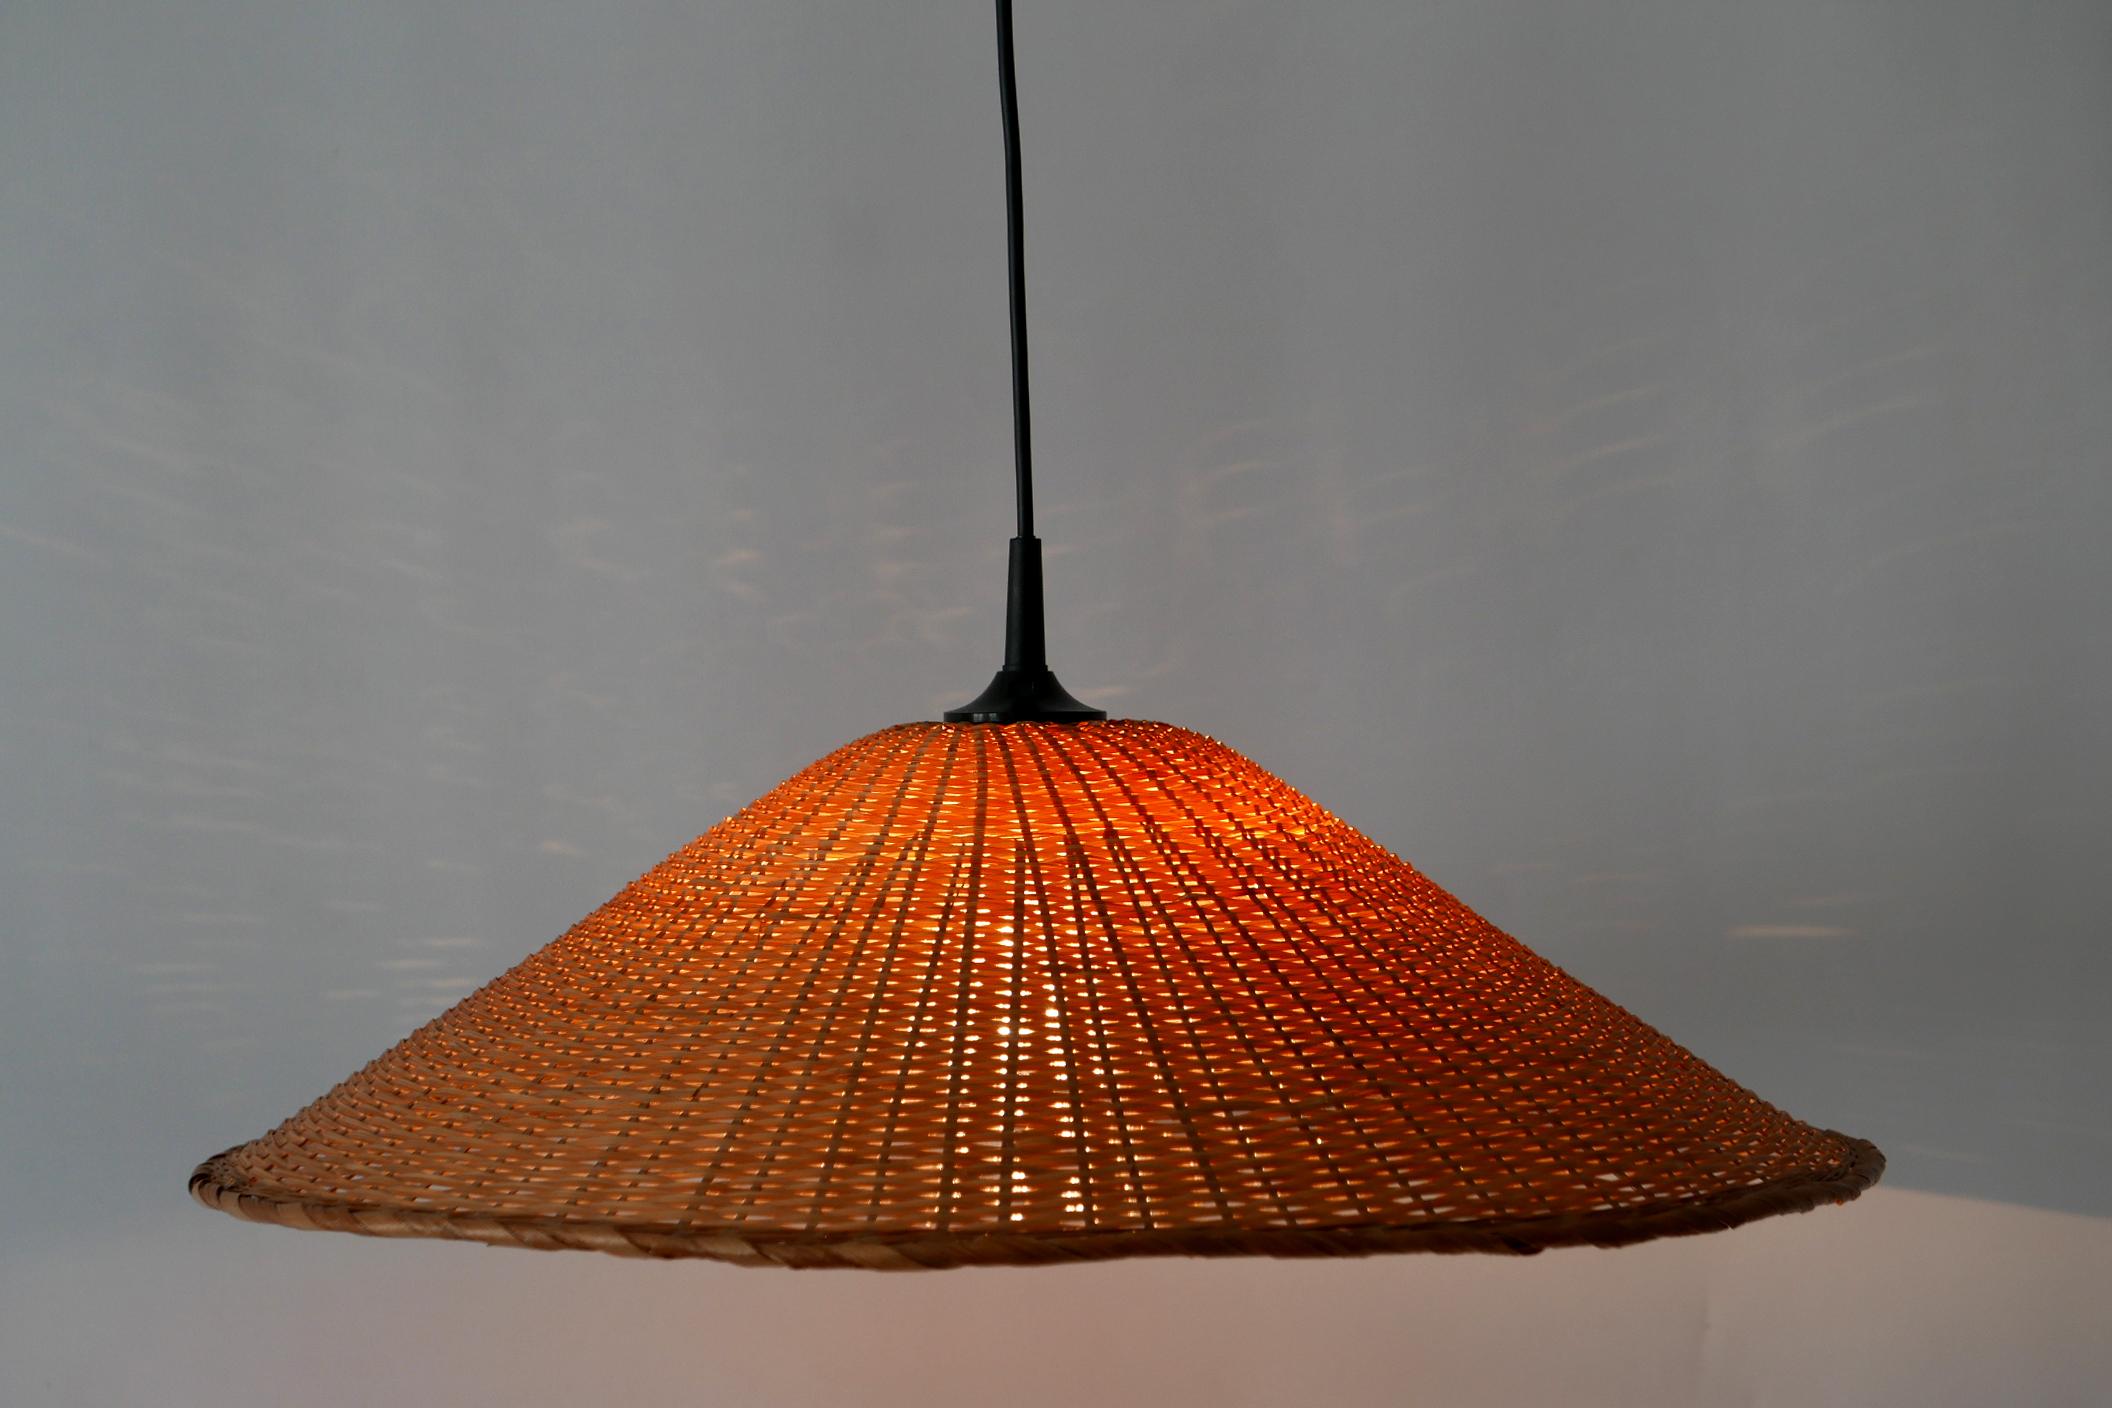 Lovely Mid-Century Modern pendant lamp or hanging light. Manufactured probably in 1960s, Germany.

Executed in wicker, it comes with 1 x E27 Edison screw fit bulb holder, is wired and in working condition. It runs both on 110/230 Volt. 

Good